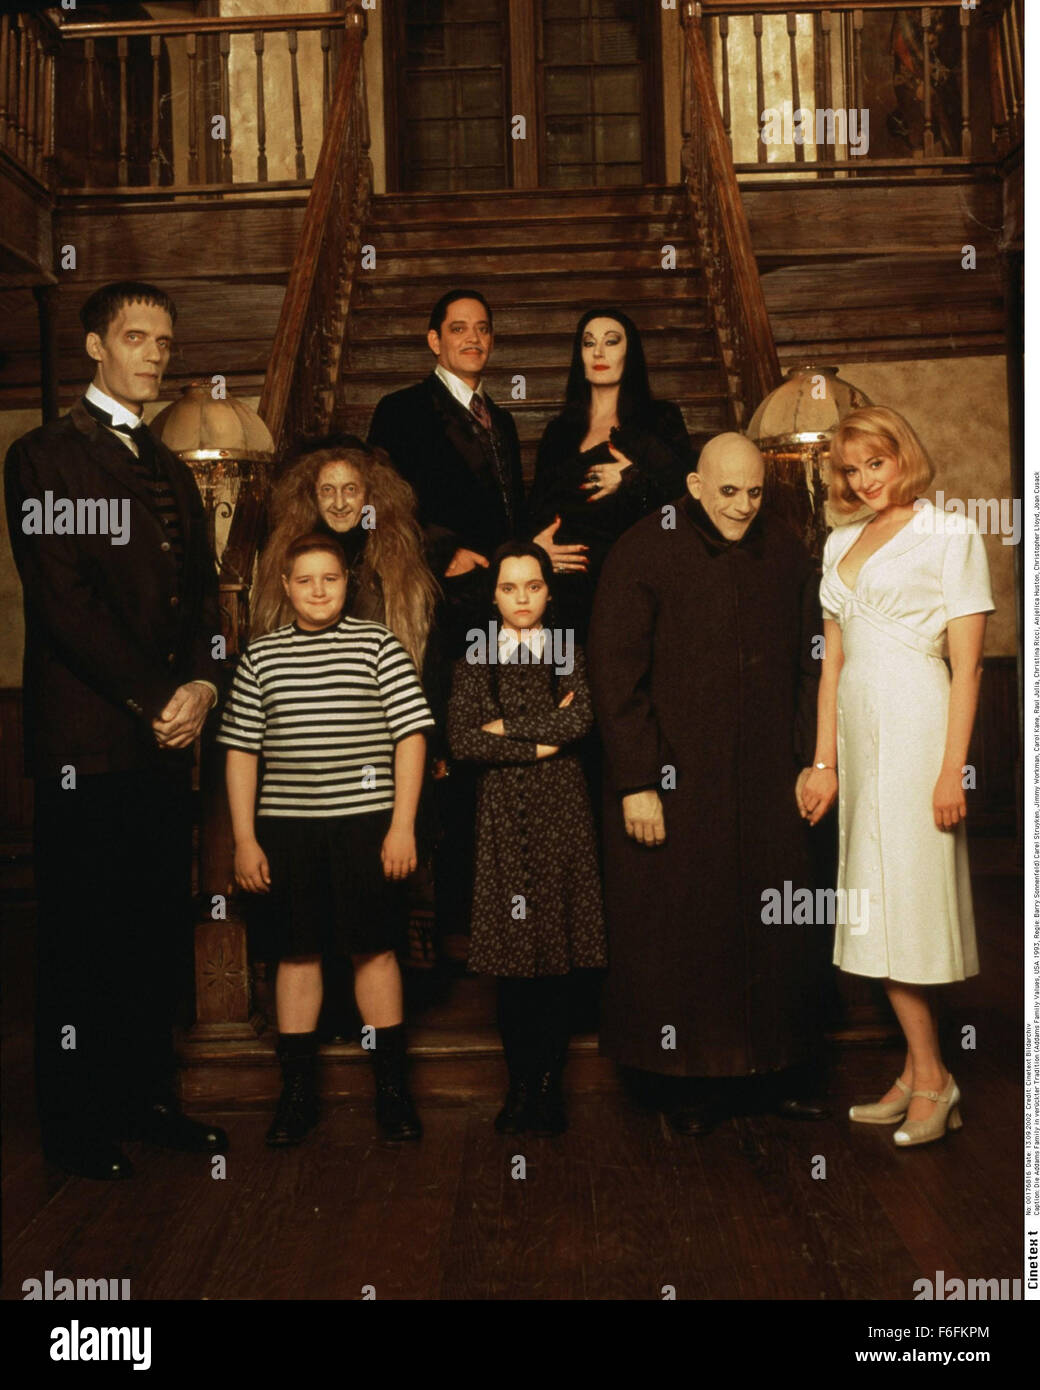 1991 The Addams Family